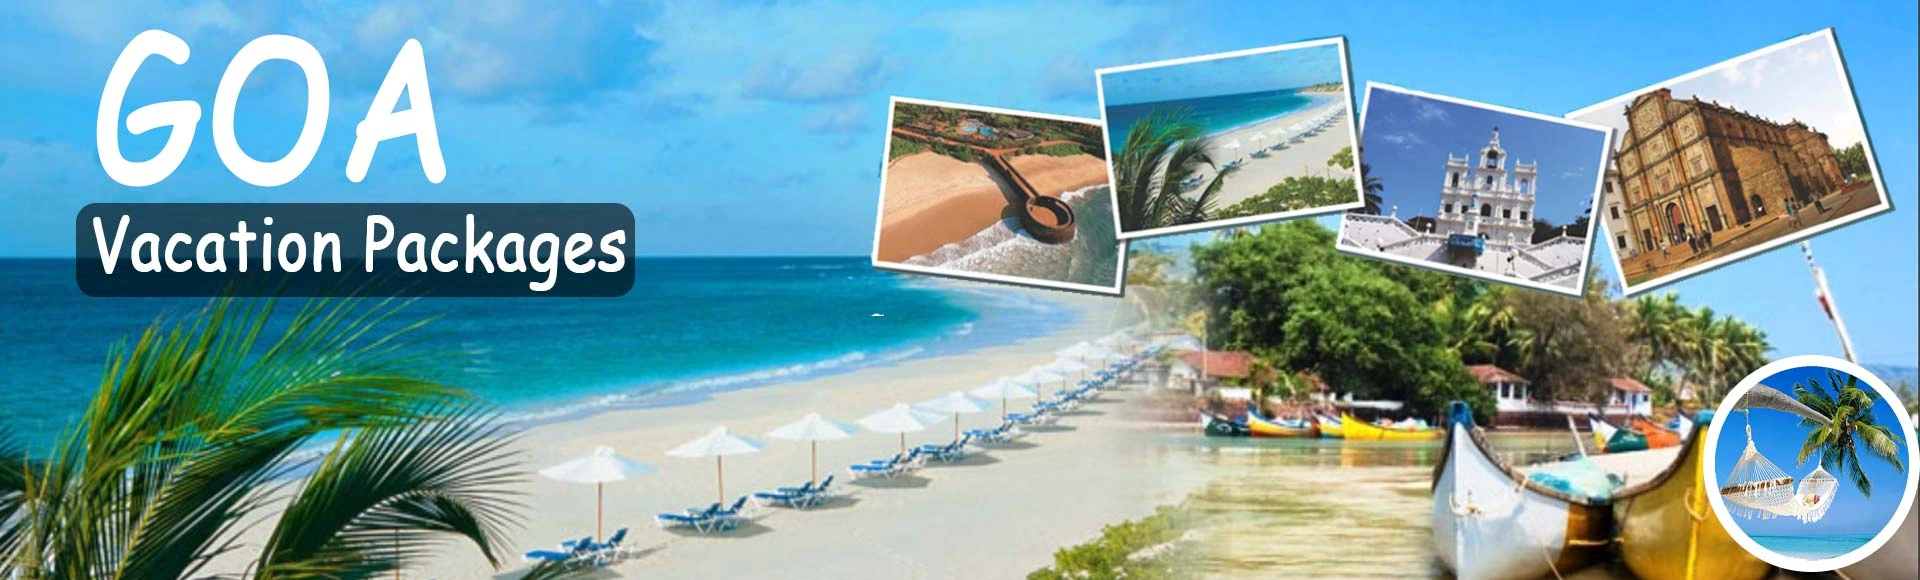 luxury goa packages